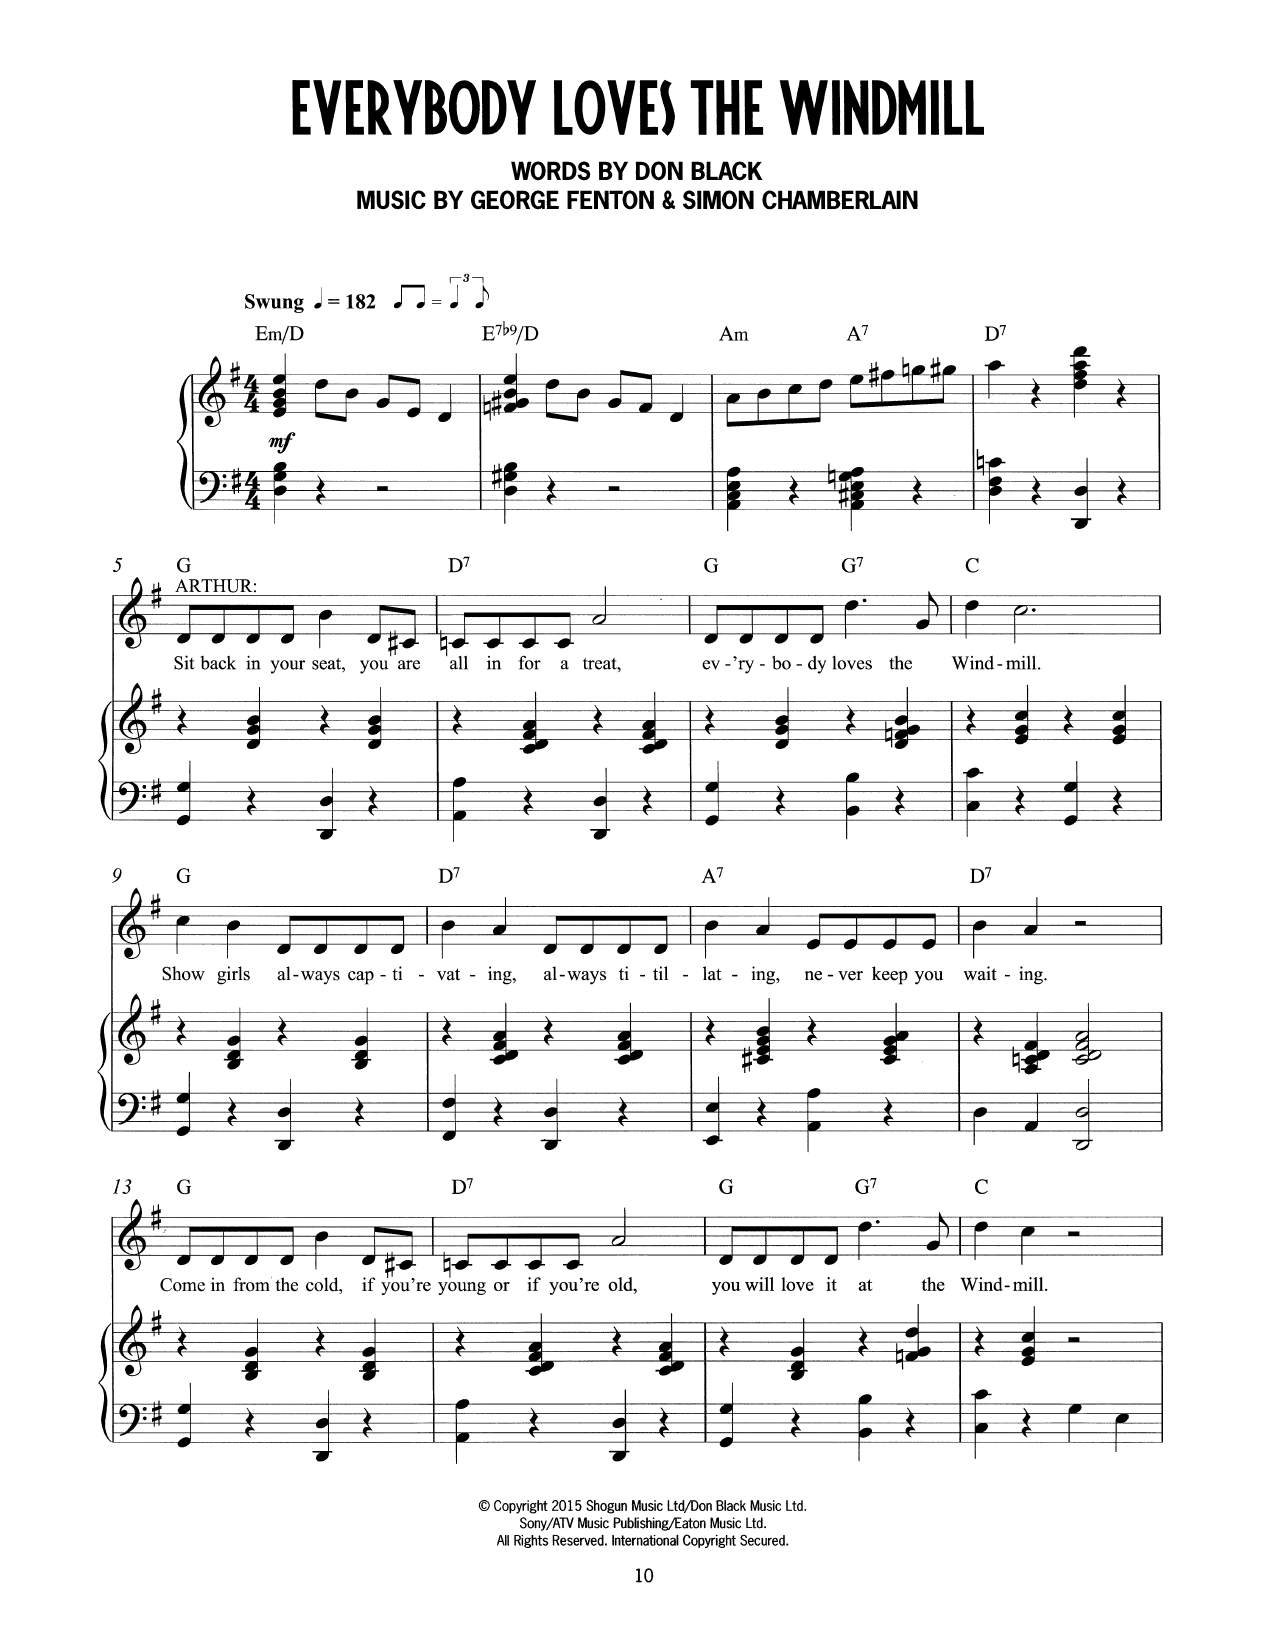 Download Don Black, George Fenton & Simon Cha Everybody Loves The Windmill (from Mrs Sheet Music